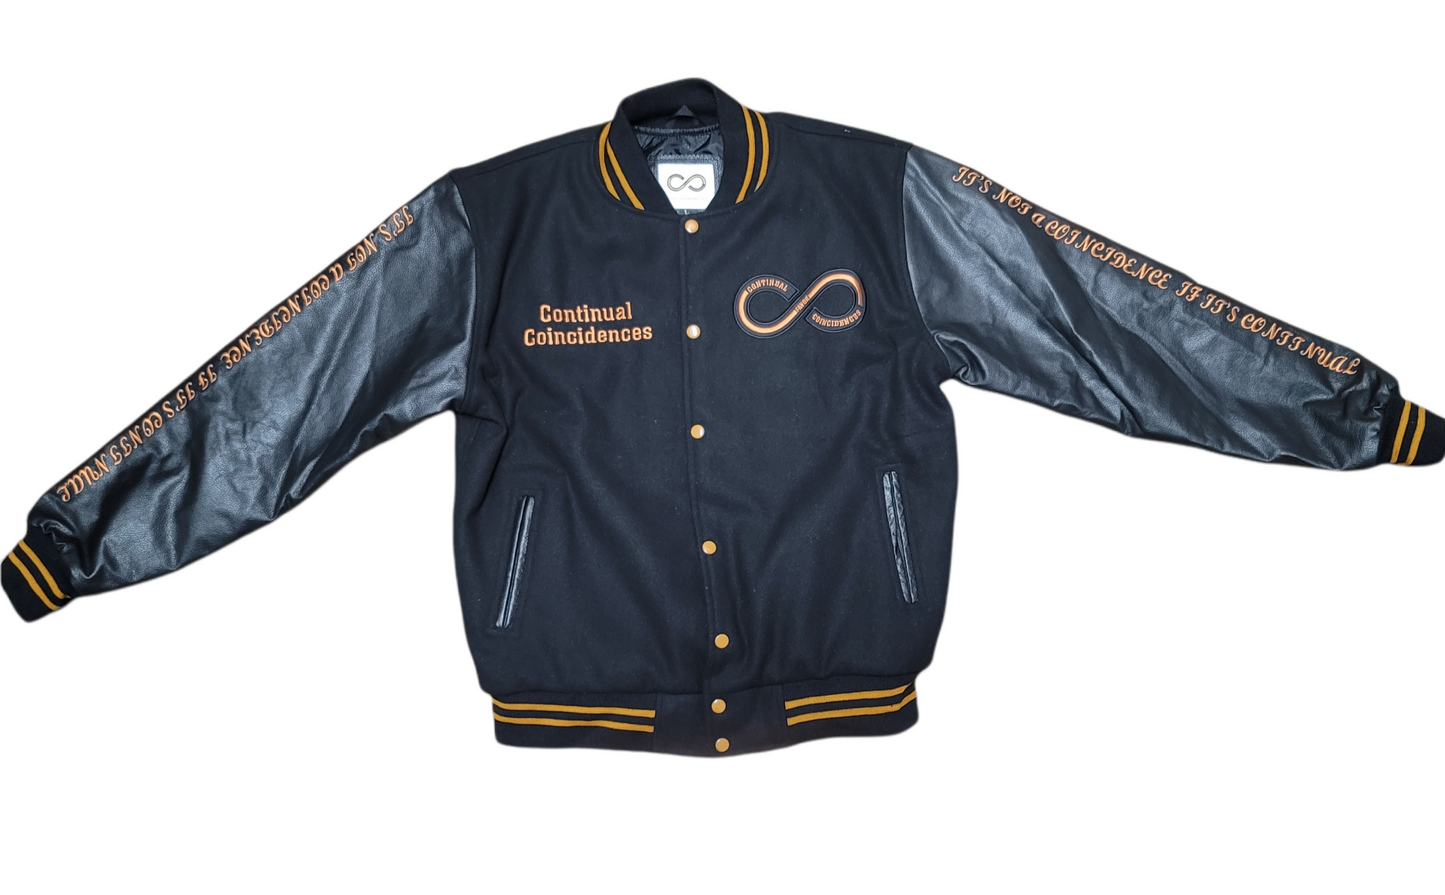 Continual Coincidences FAVORED (No Coincidences) Letterman Jacket - Limited Edition AGAPE Version